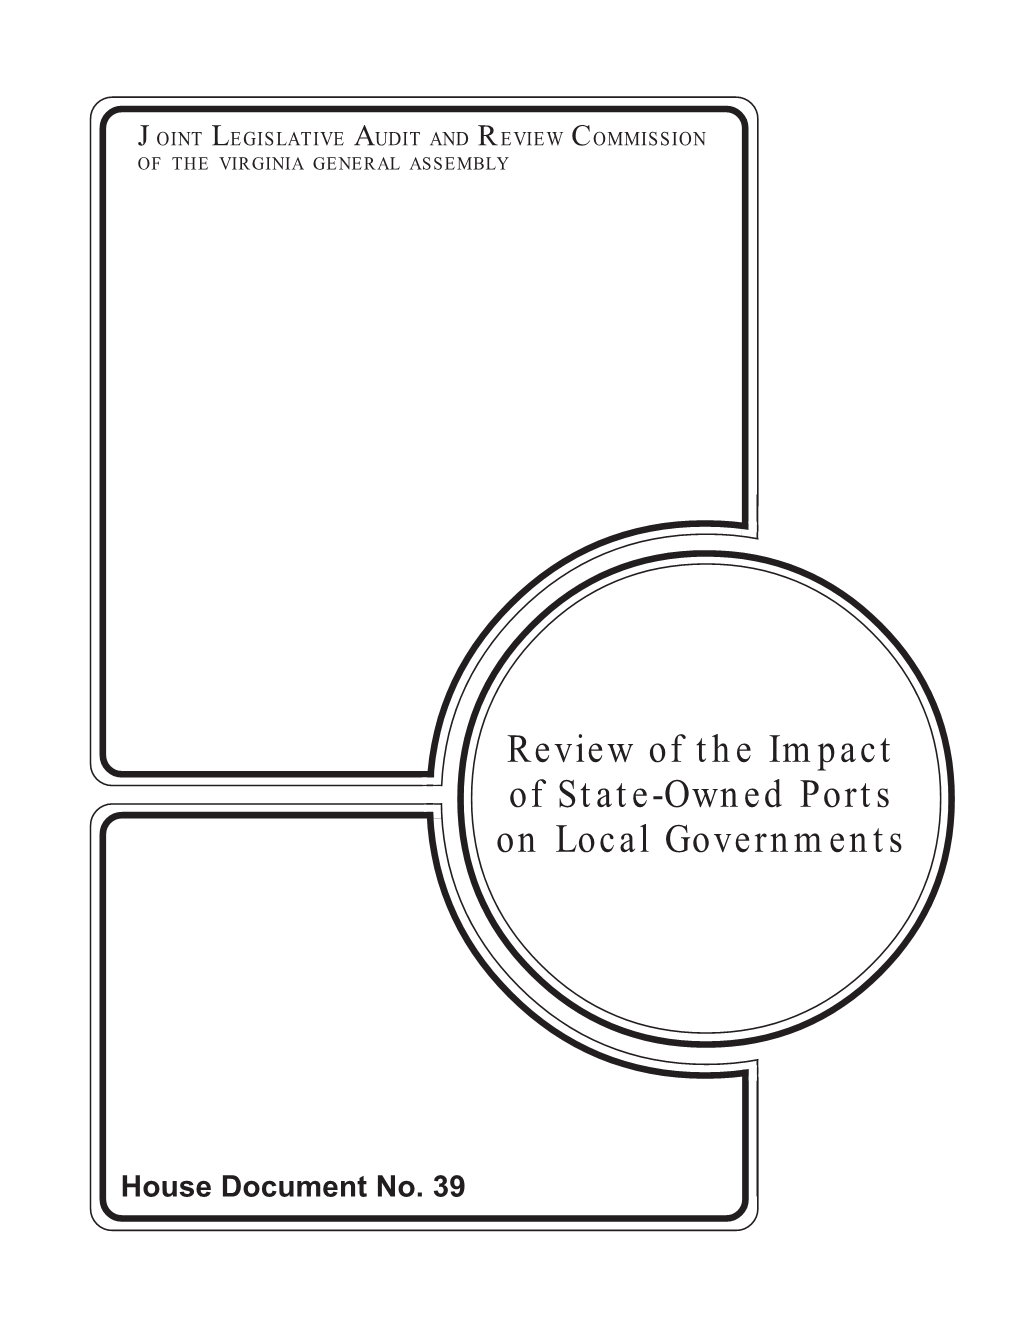 Review of the Impact of State-Owned Ports on Local Governments